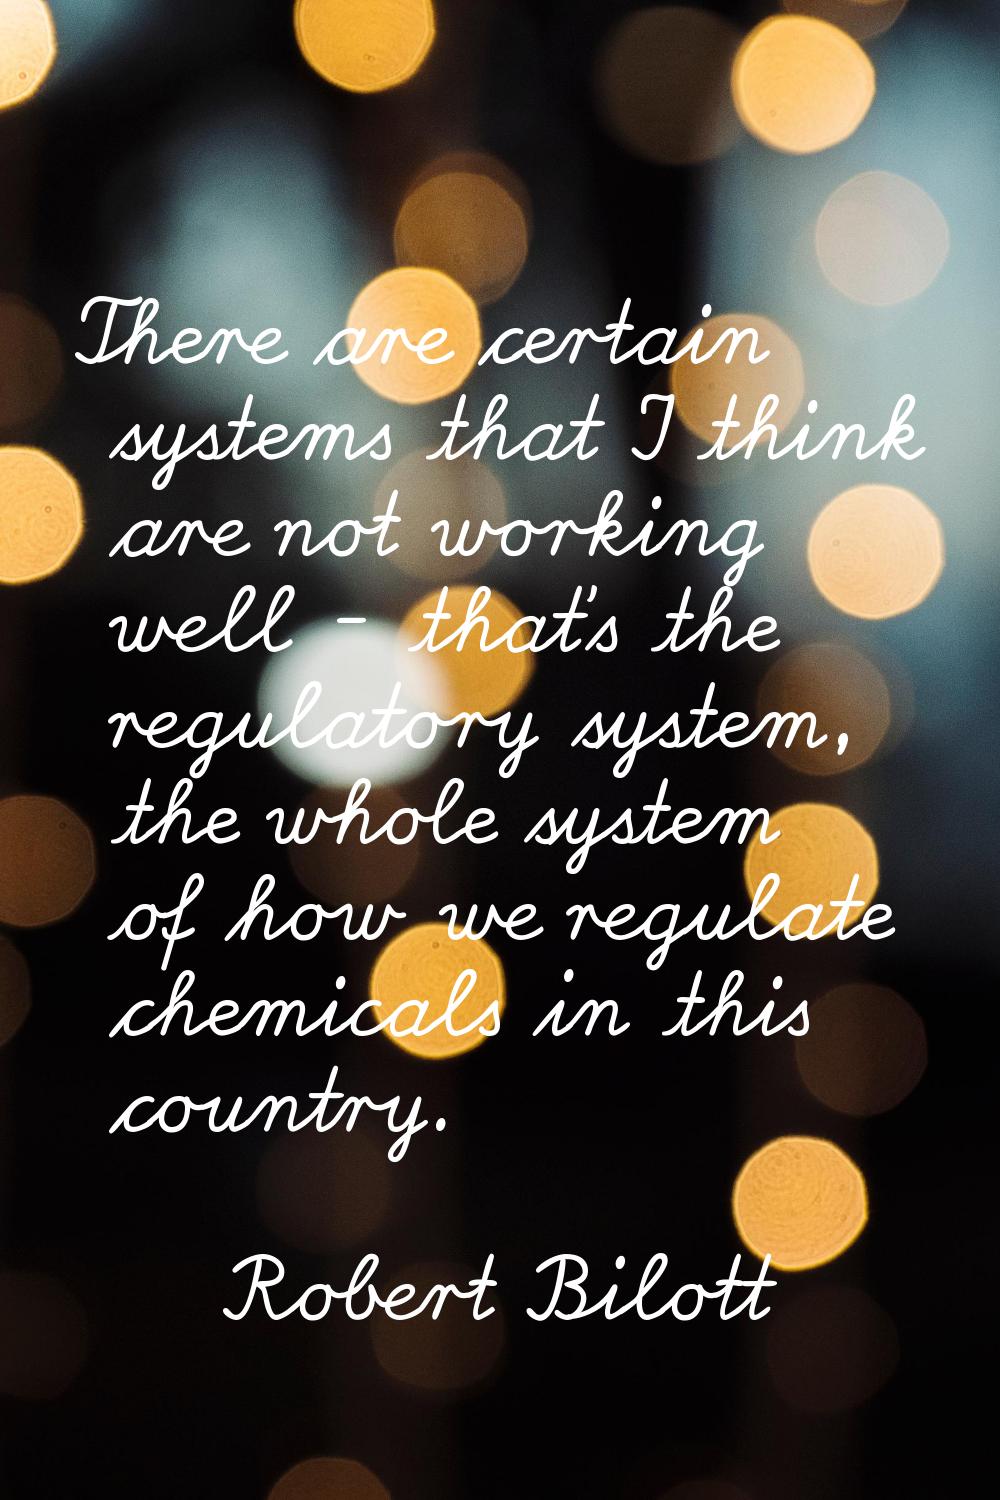 There are certain systems that I think are not working well - that's the regulatory system, the who